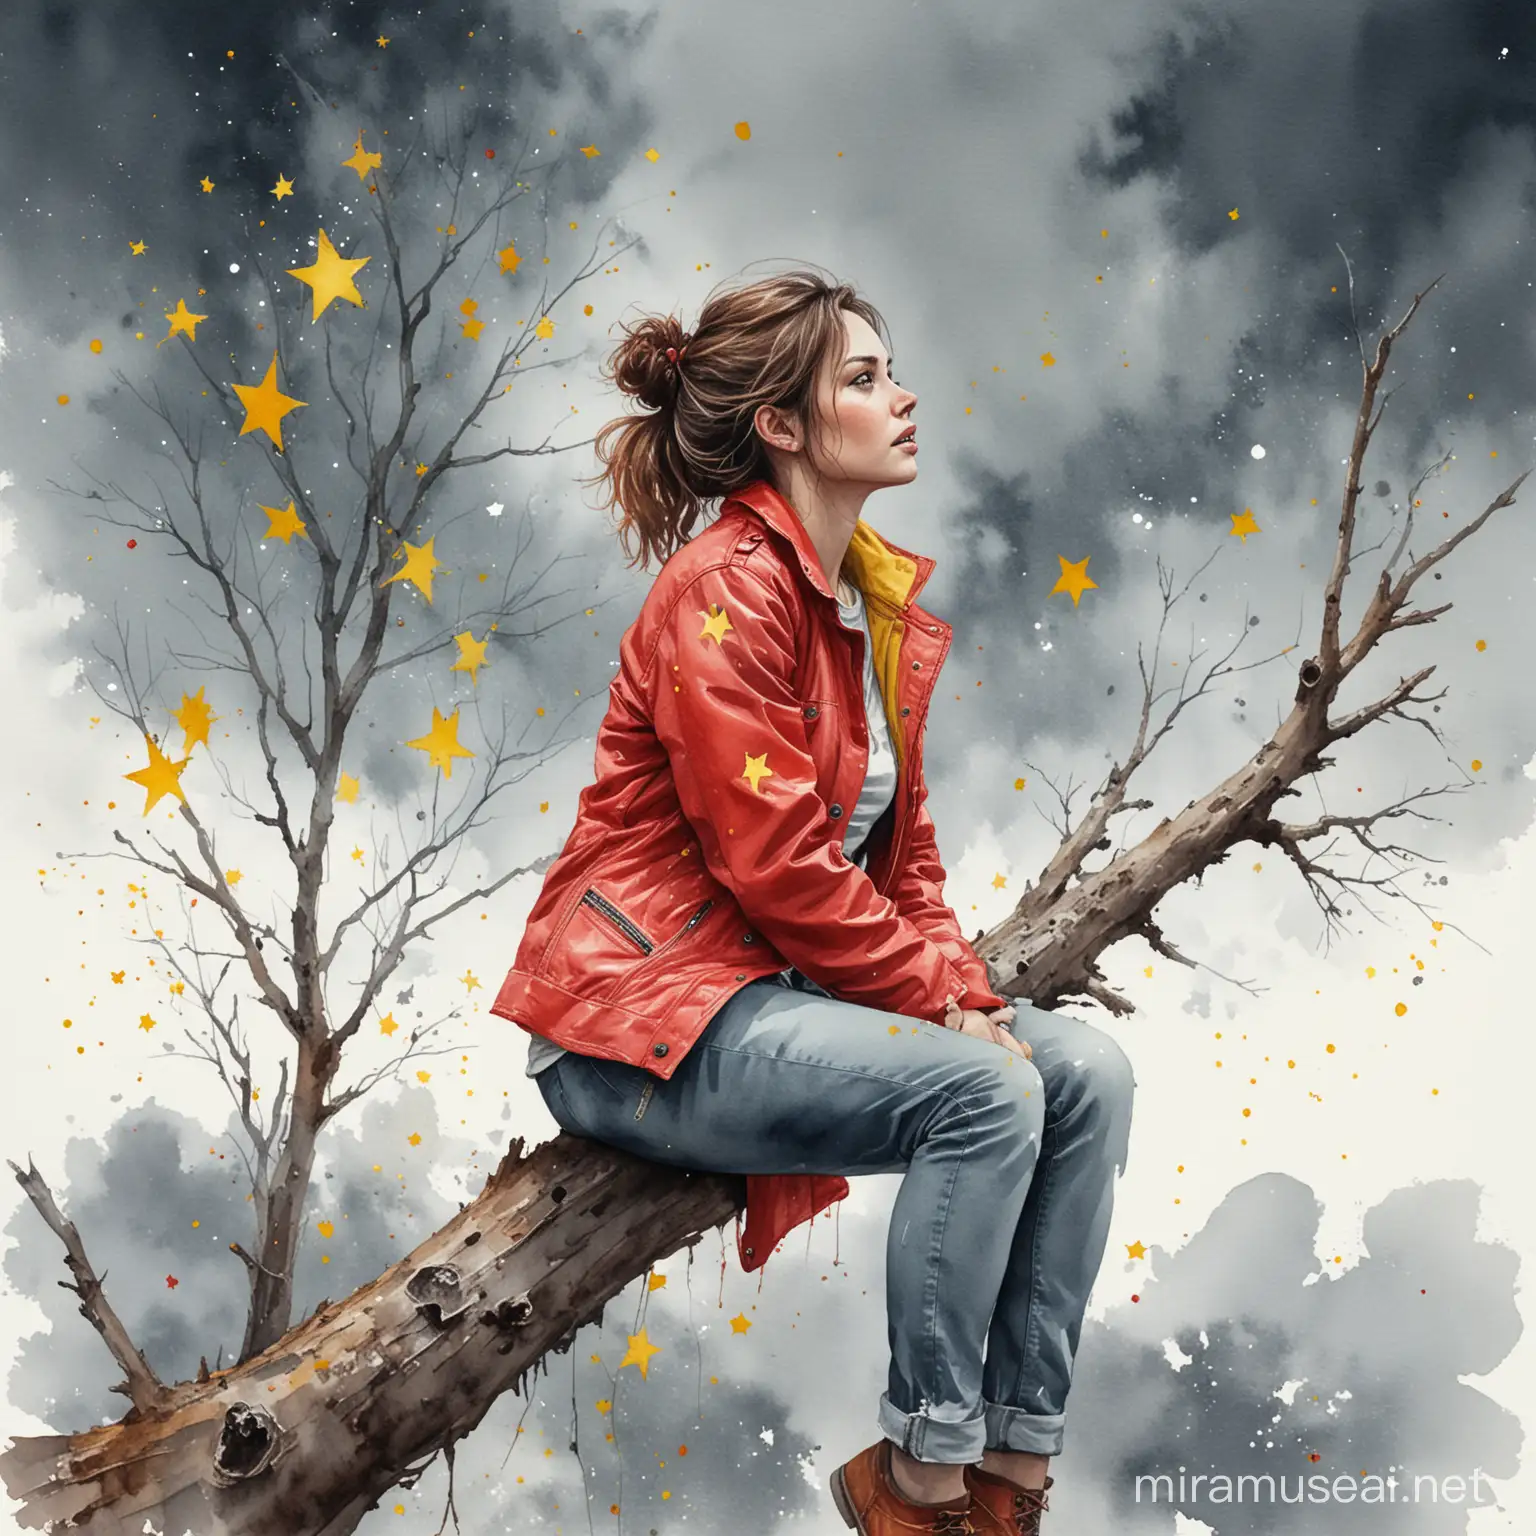 Watercolor Illustration of Woman in Red Jacket Sitting on Tree Branch under Starry Sky